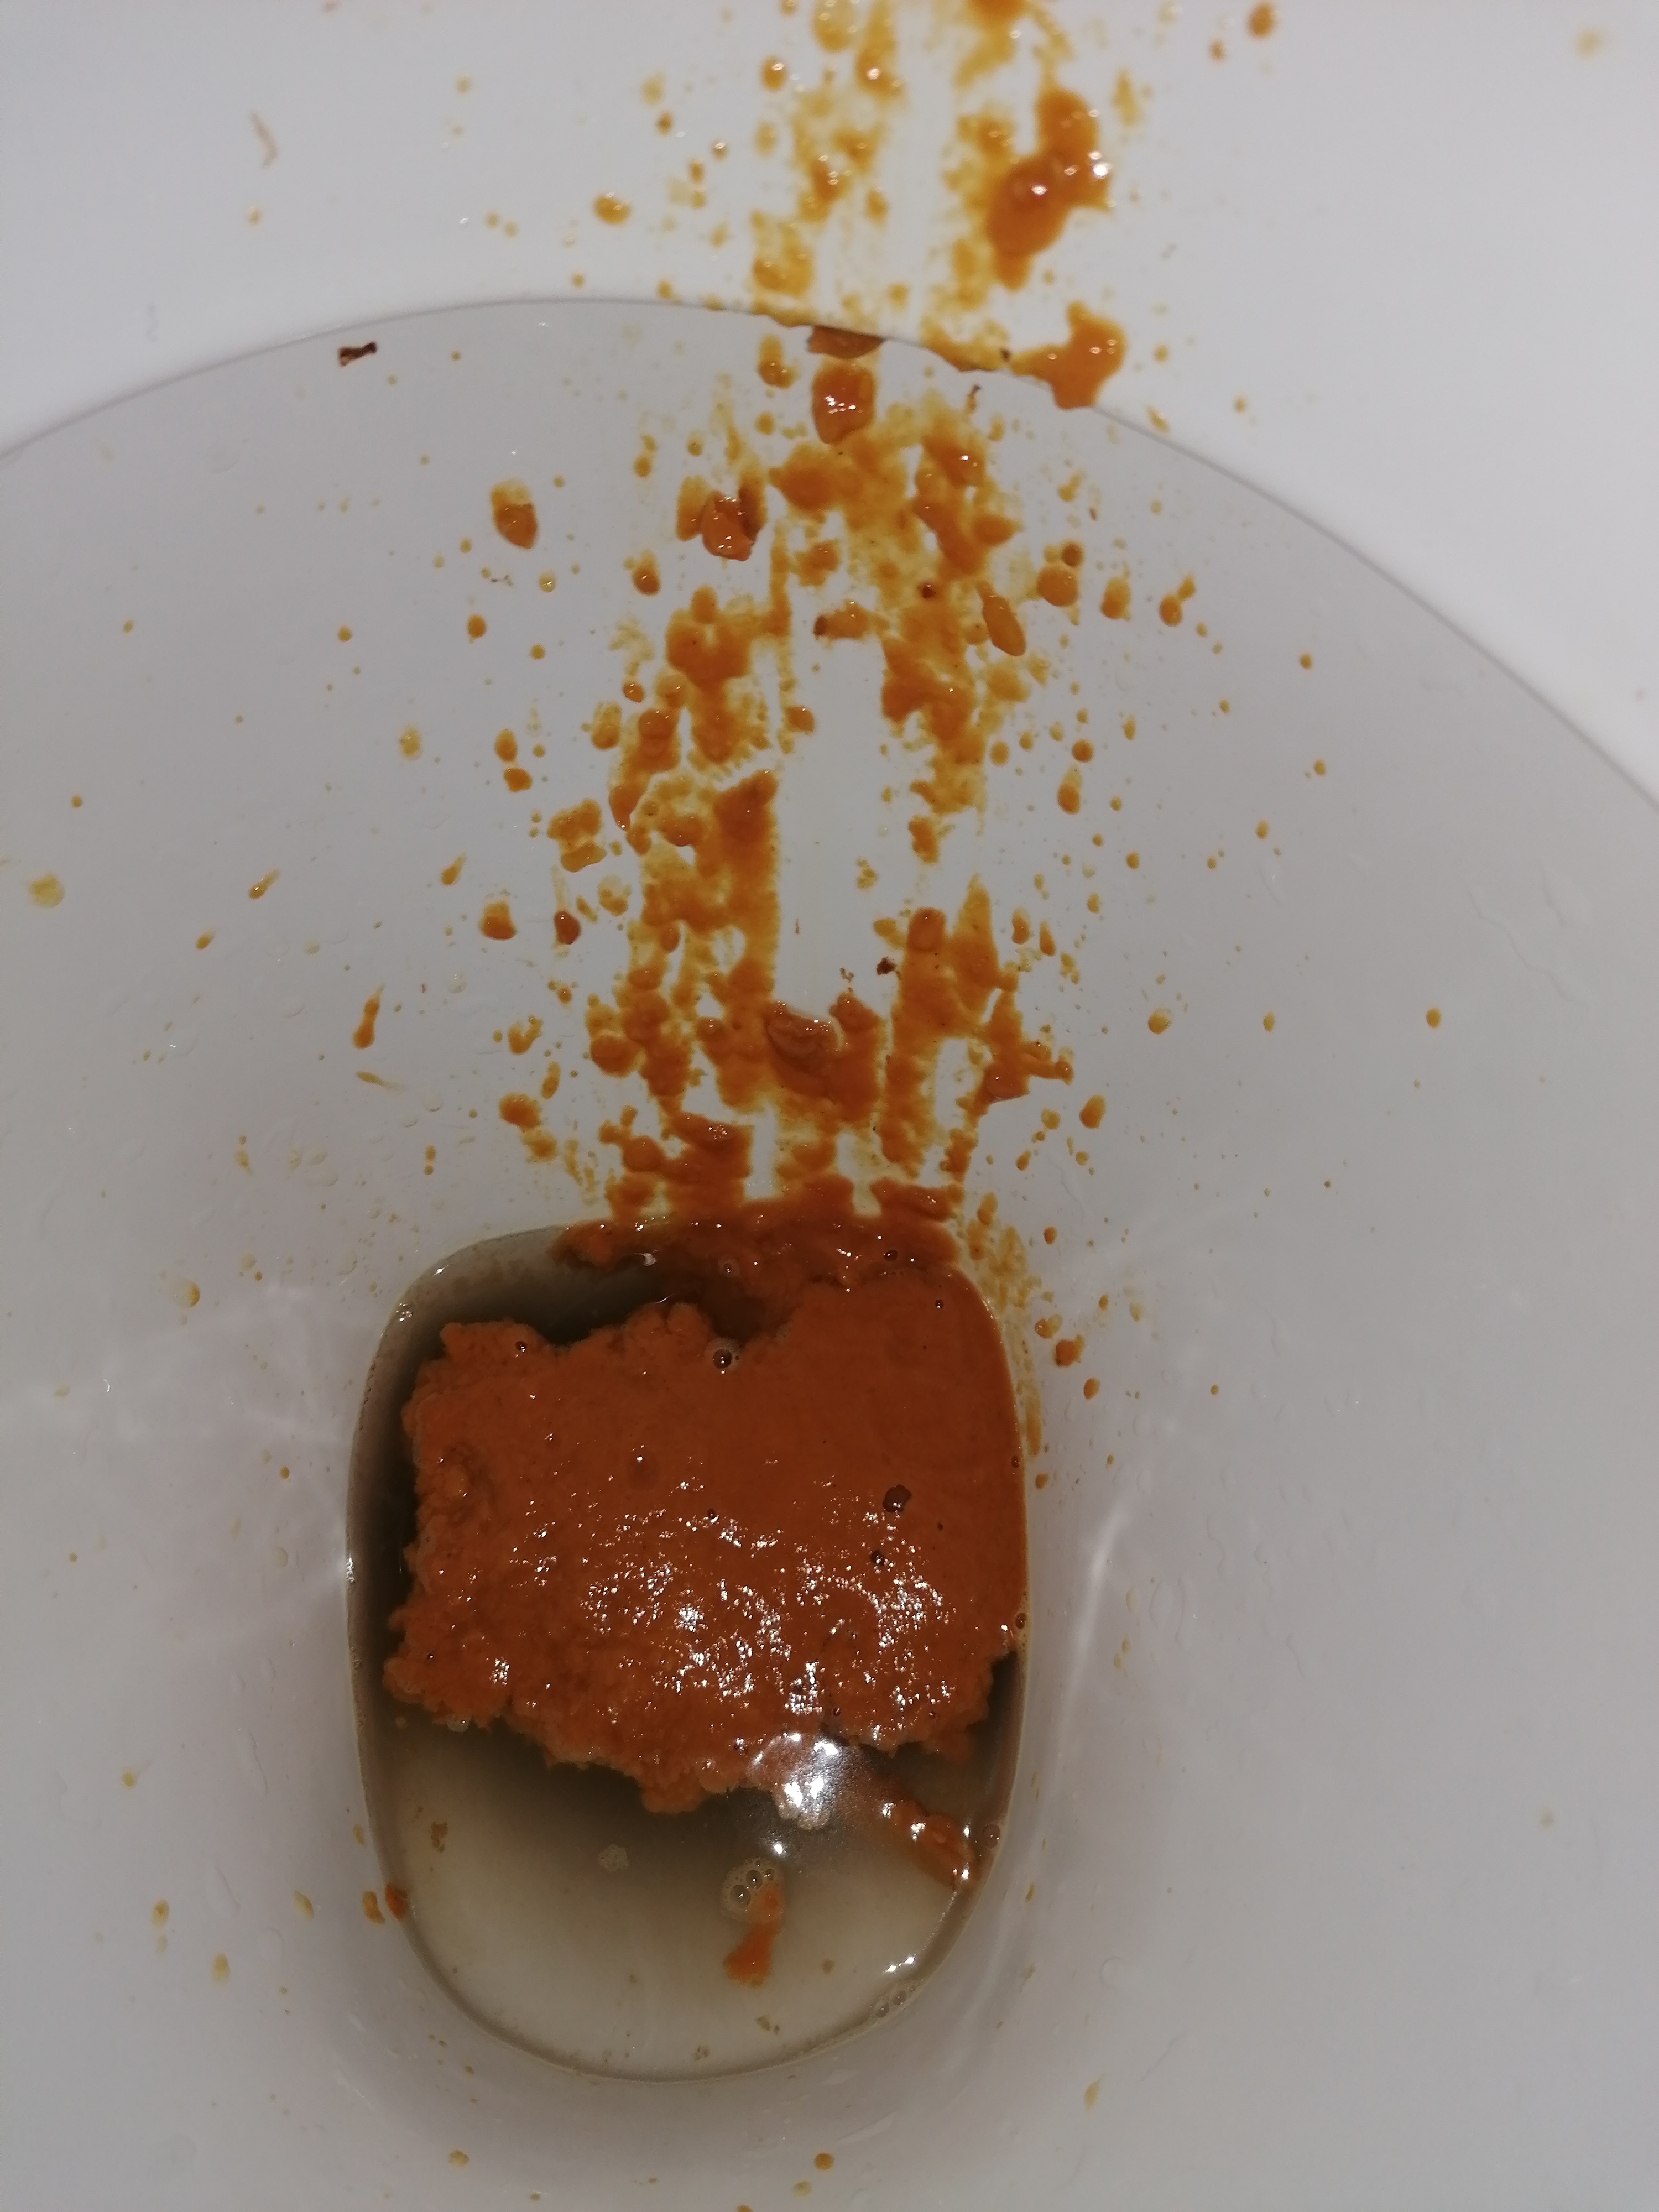 Morning diarrhea shit on mates toilet after pigging out on curry